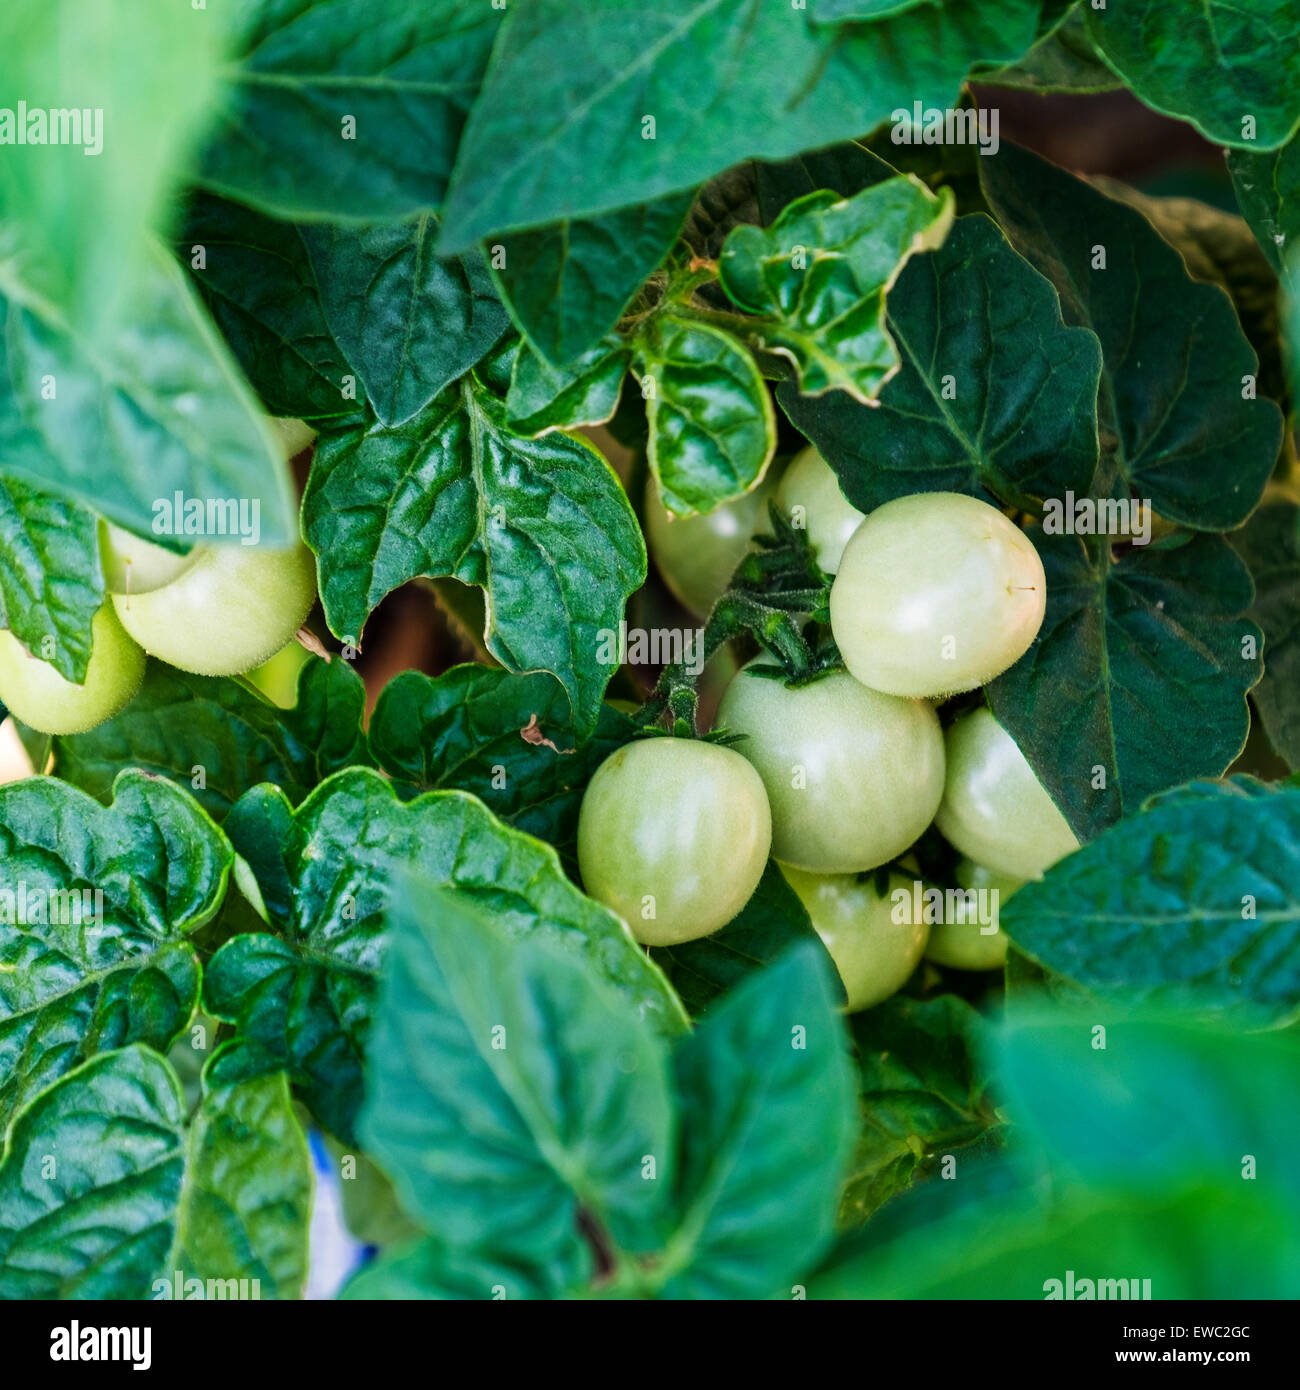 A tomato plant with small, new green tomatoes, Solanum lycopersicum. USA. Home grown and organic. Stock Photo